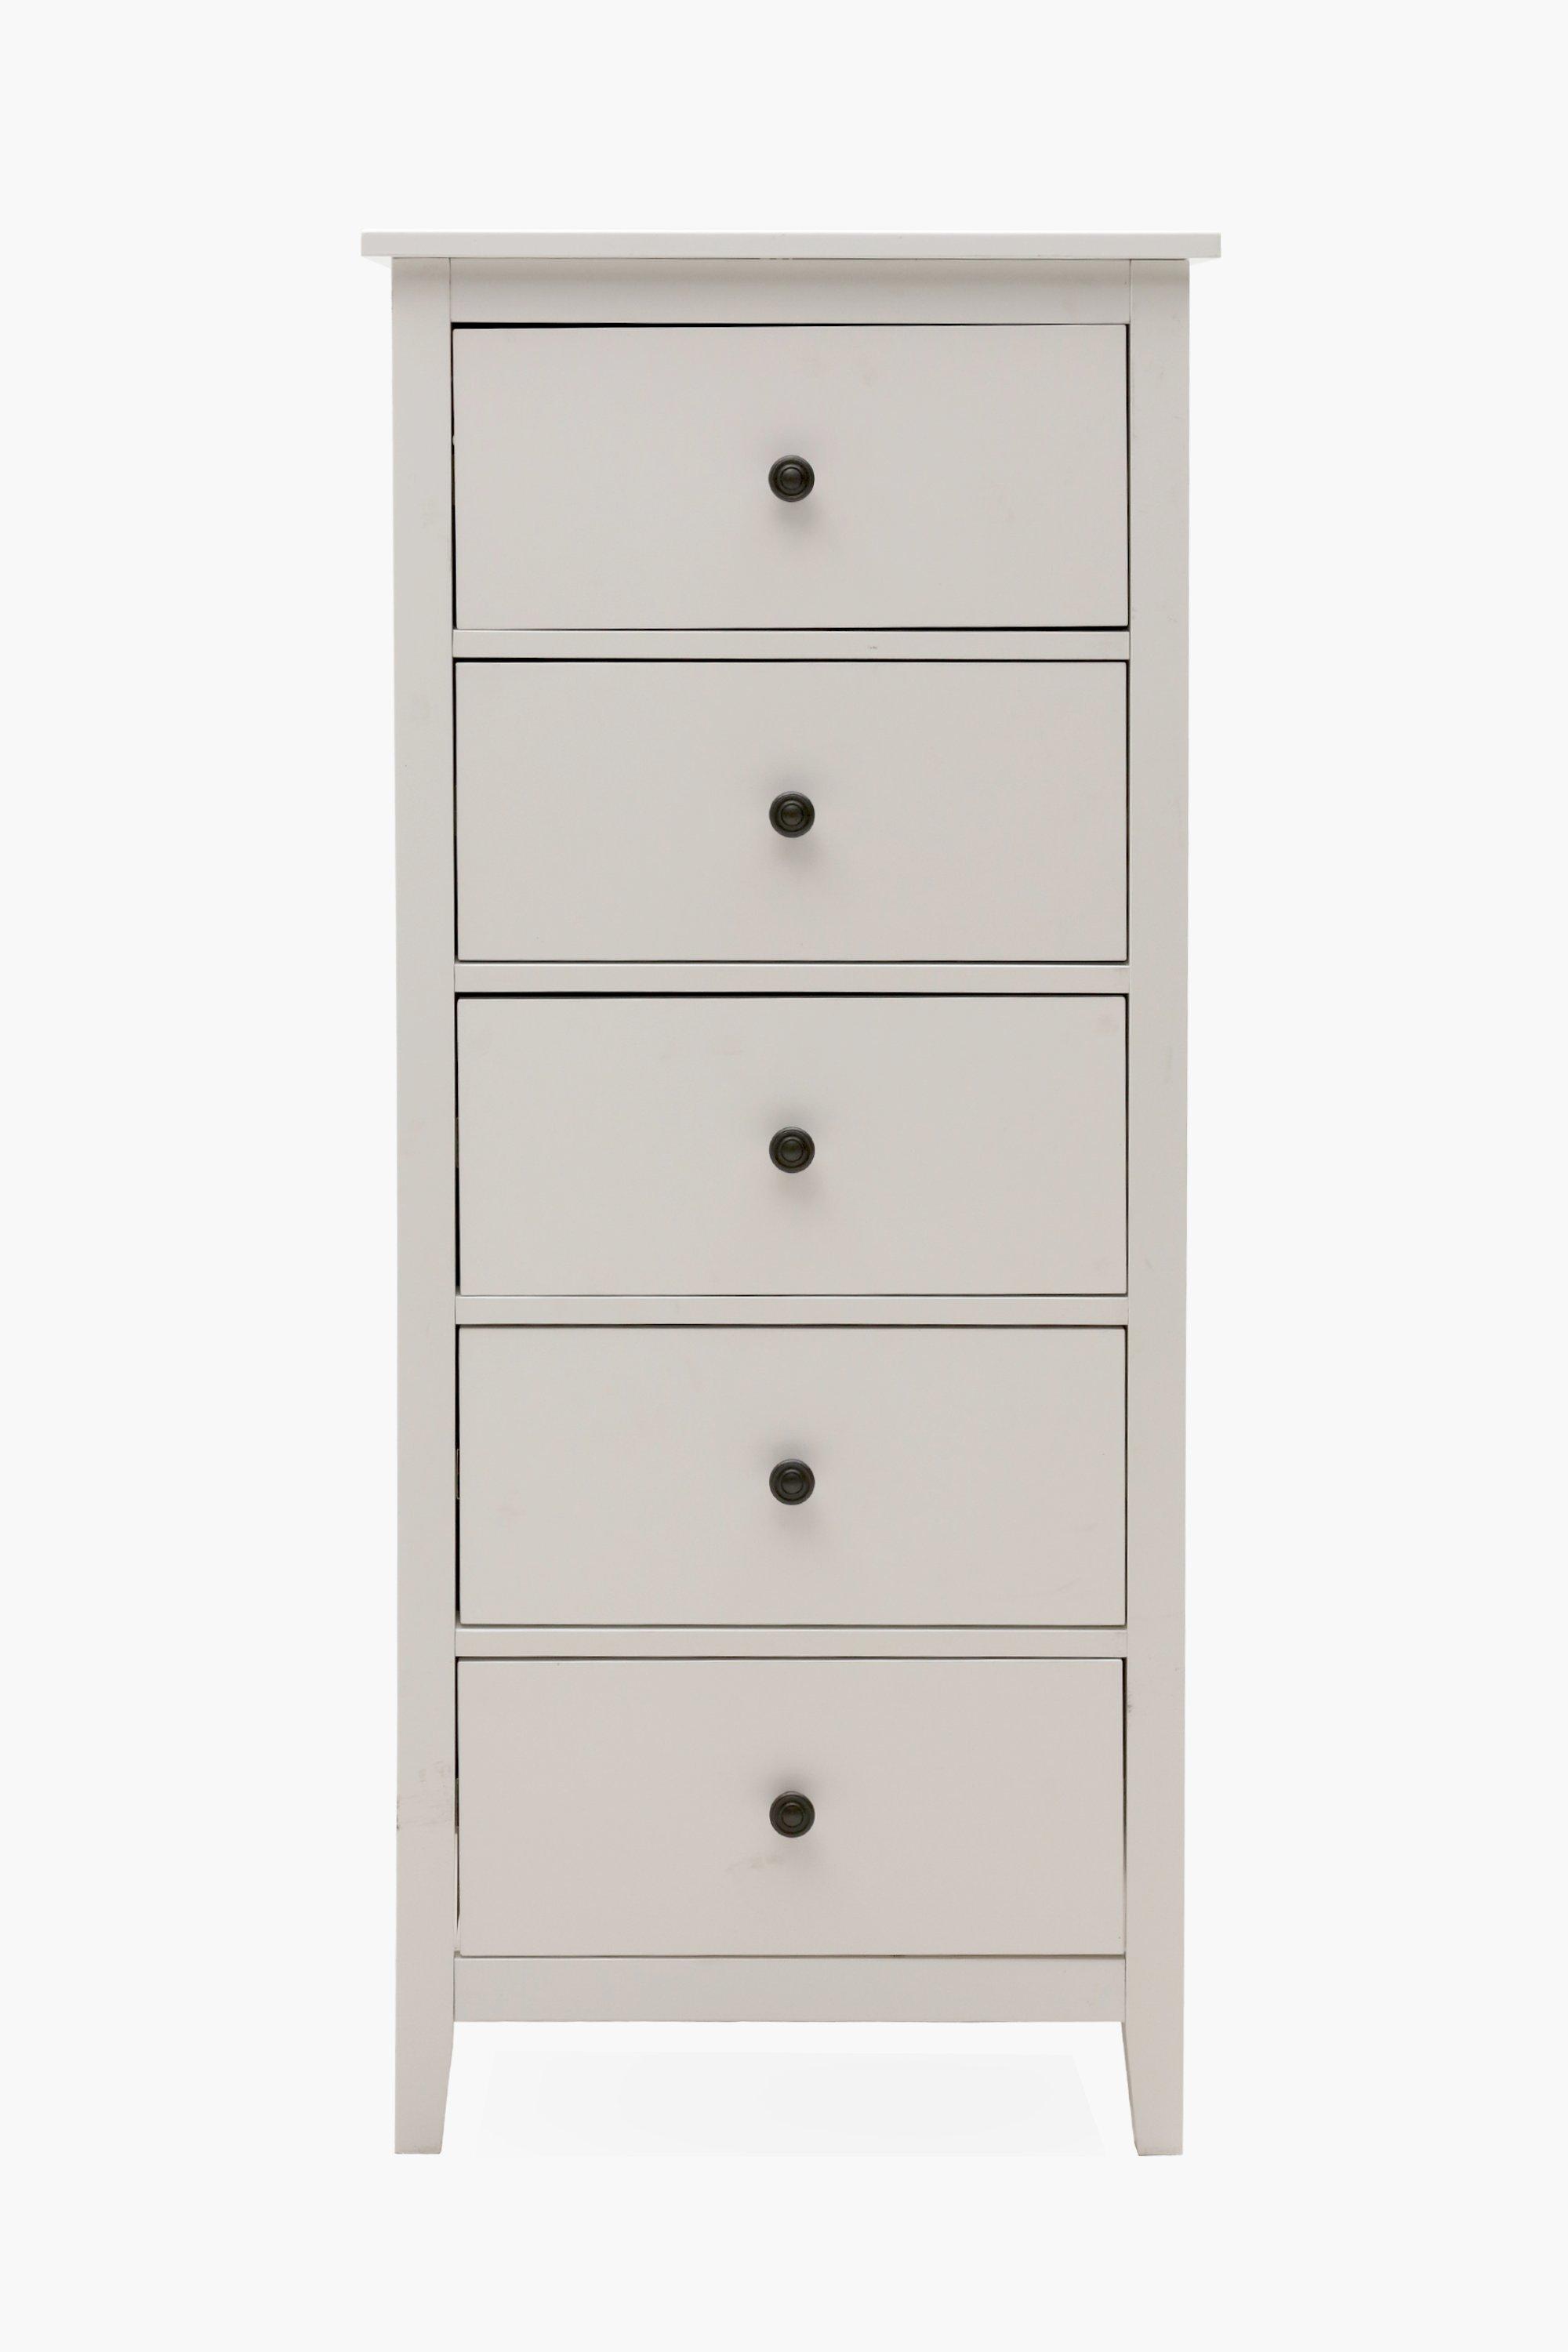 Buy Bedroom Pedastals & Chest Of Drawers Online | MRP Home